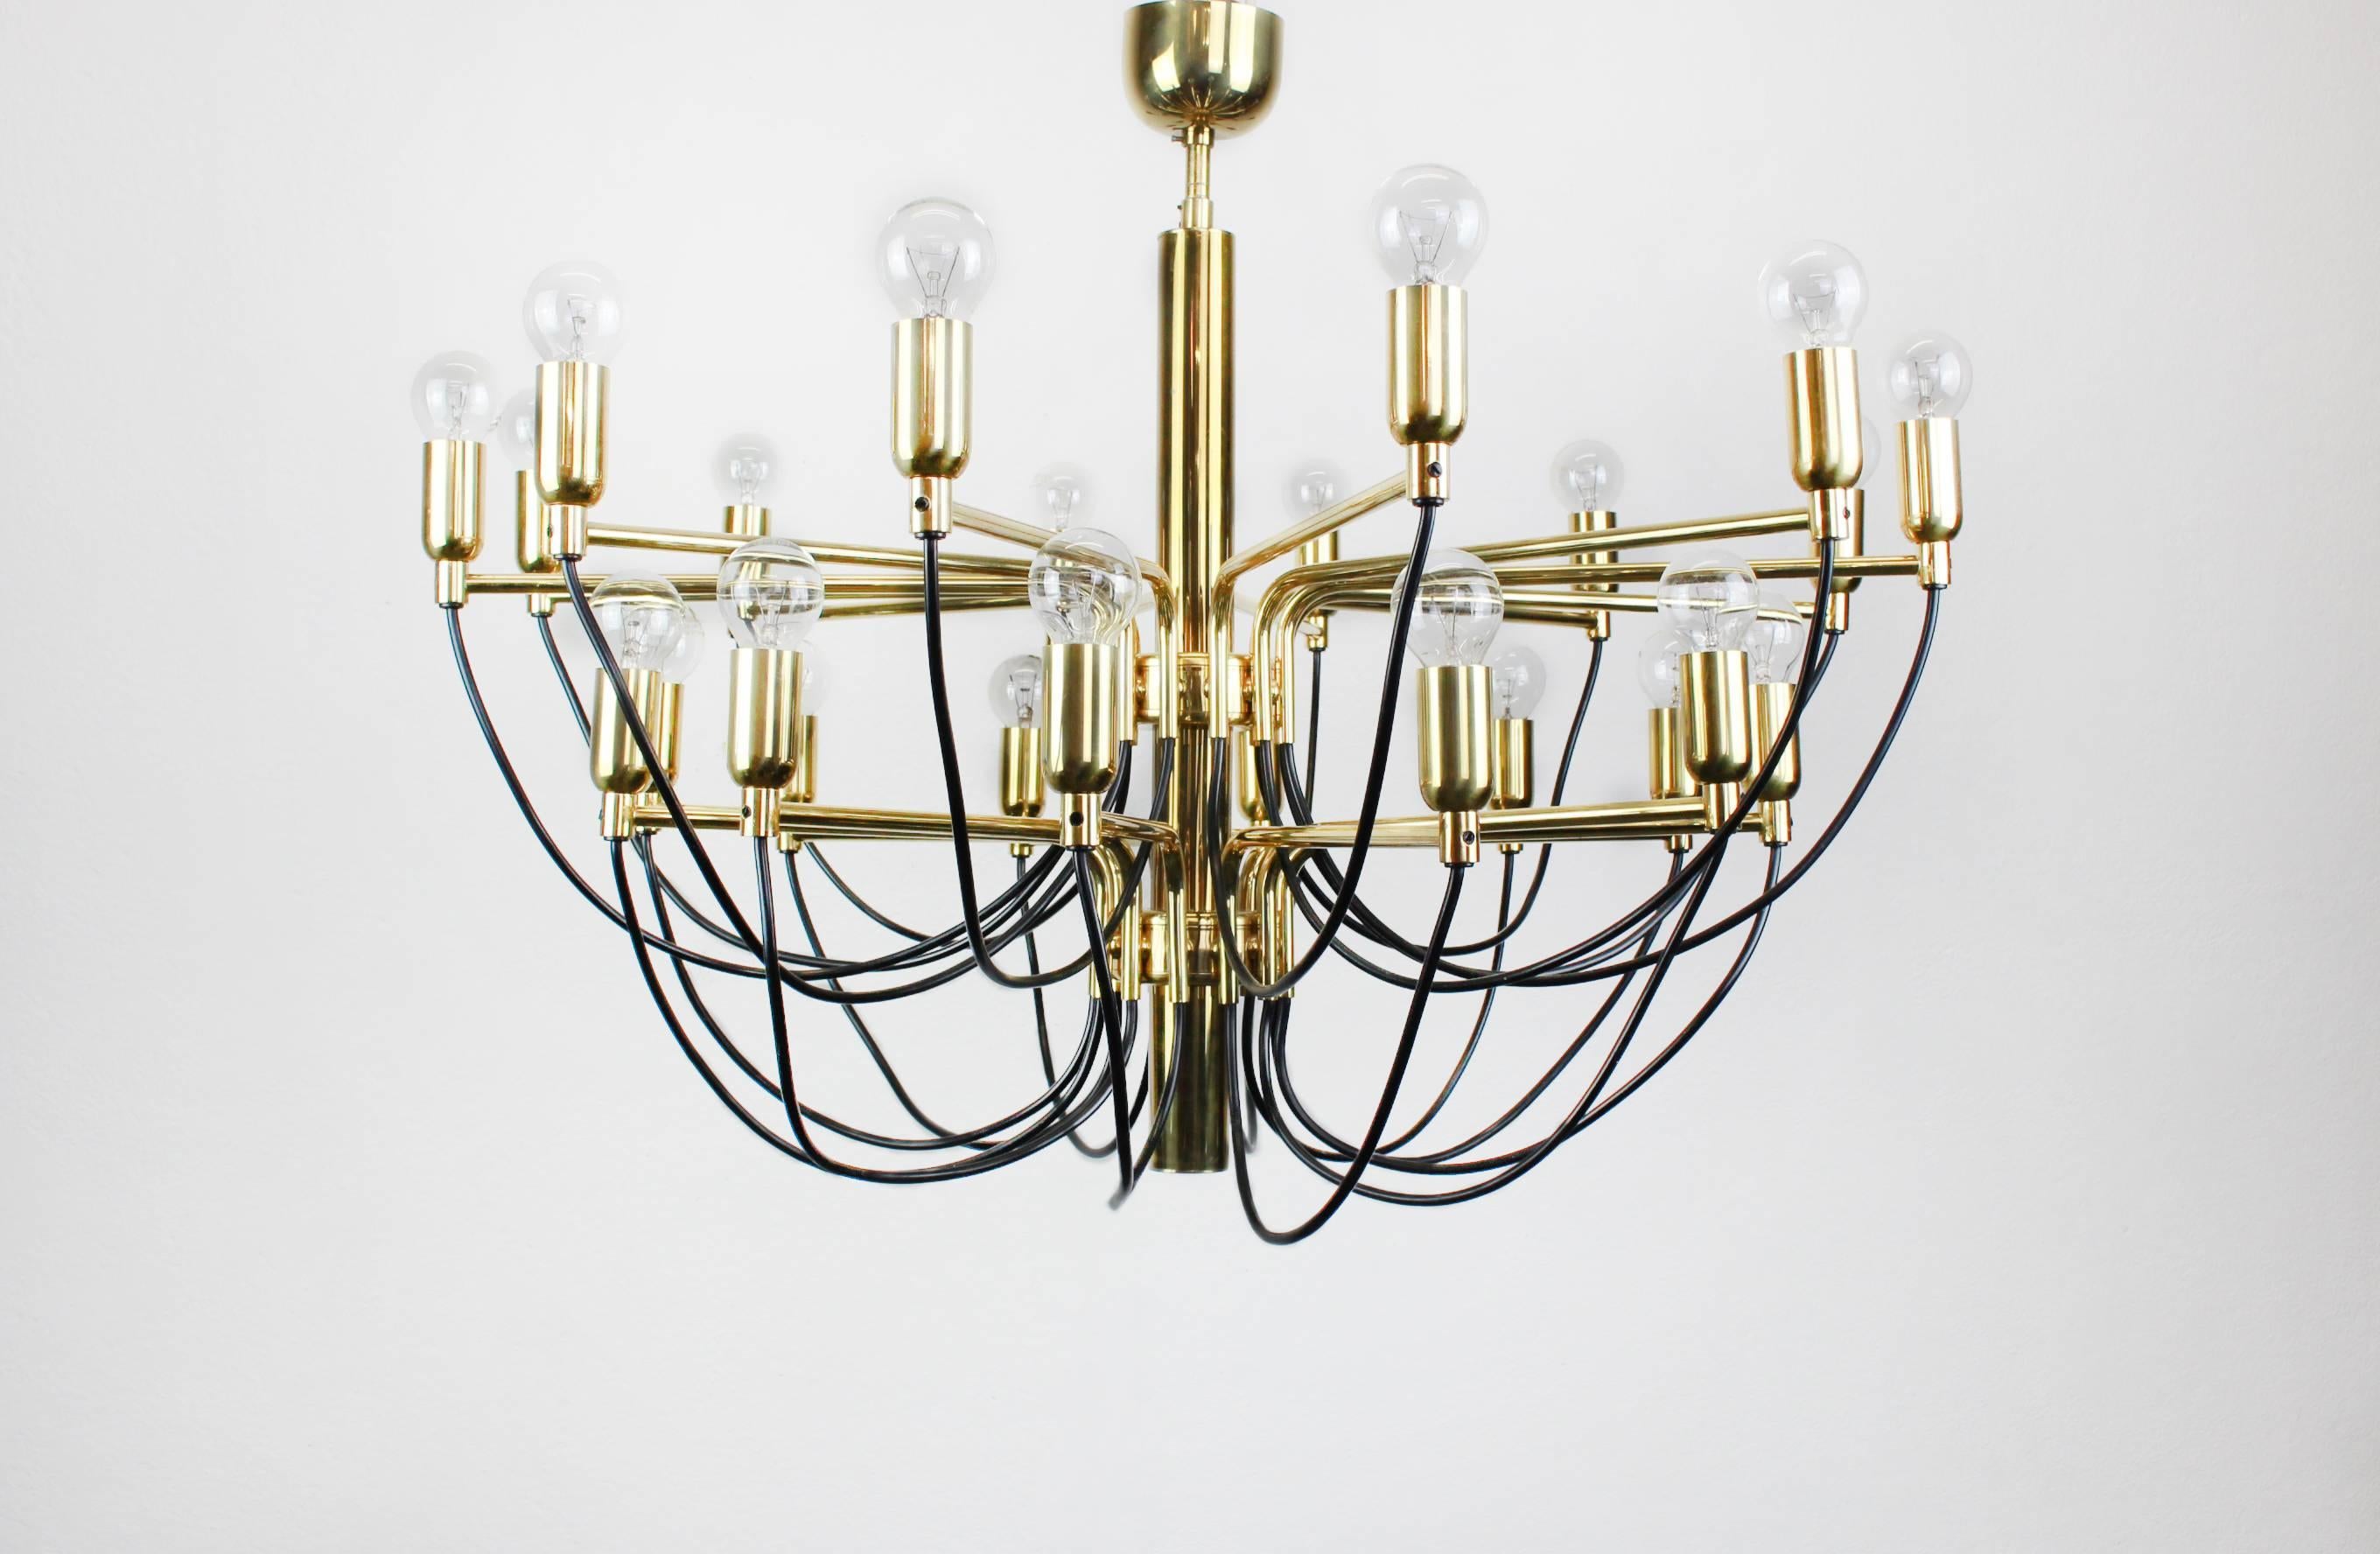 Huge Sputnik brass chandelier in Sarafatti Stil from Germany, 1970s.

Sockets: 24 x E14 small bulbs

Height can be adjusted for free

Very good condition , small tiny signs of age.

All electrical items function on various voltage standards